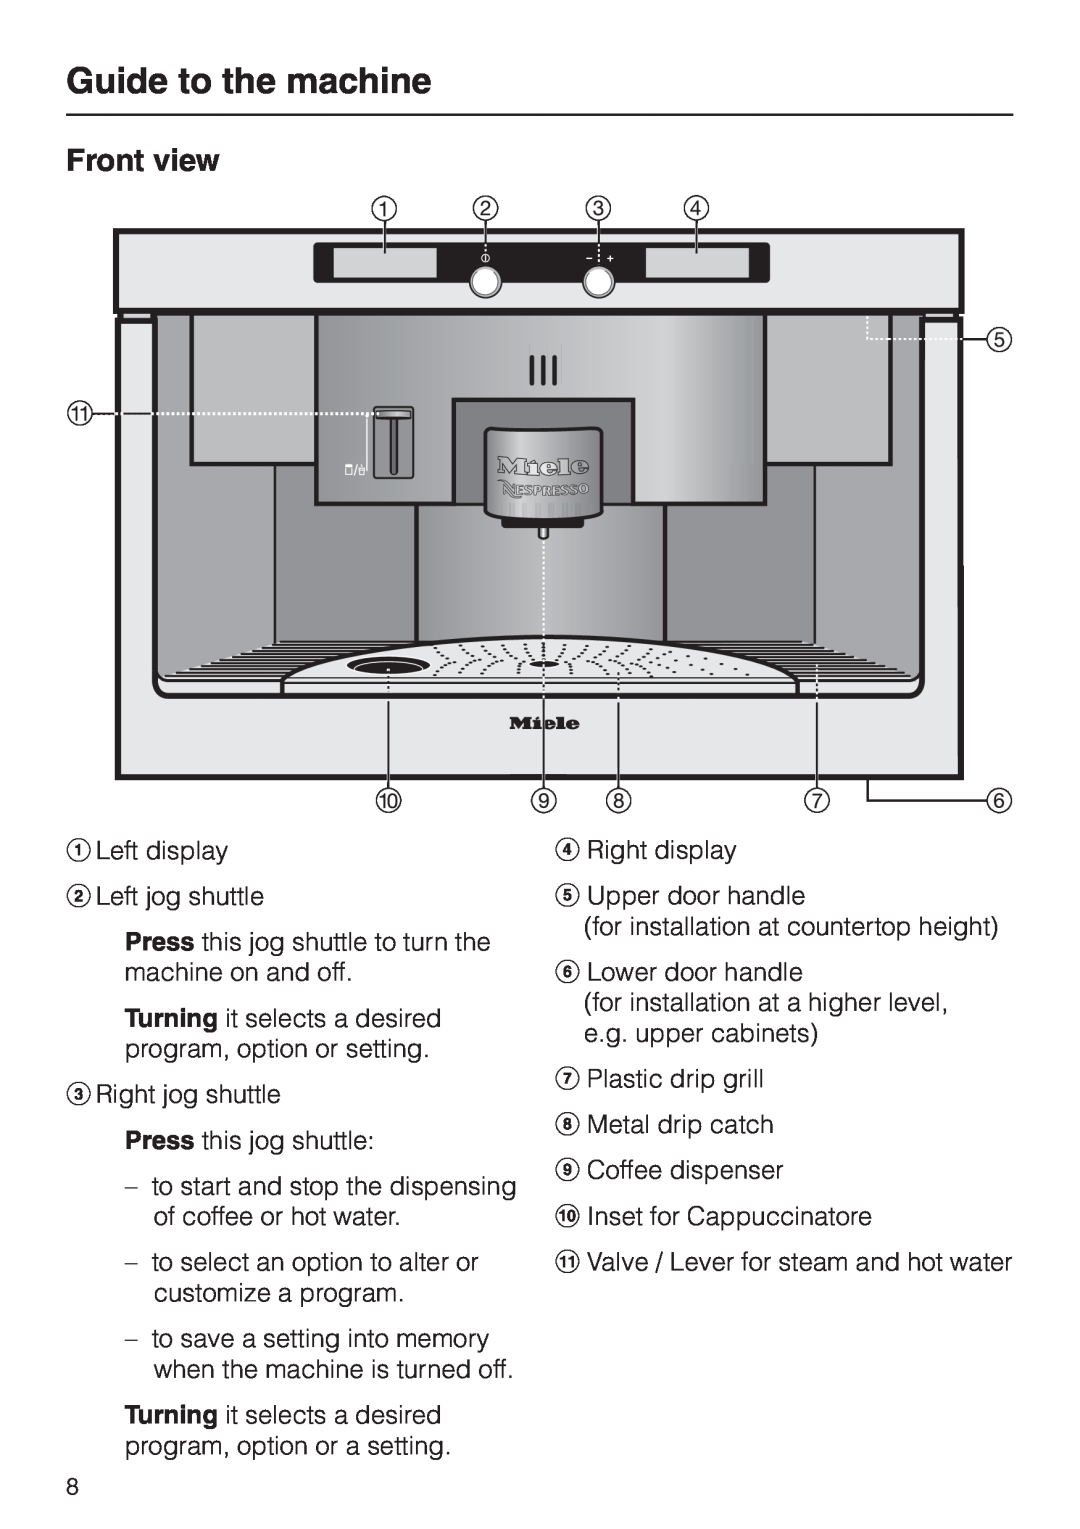 Miele CVA 2660 installation instructions Guide to the machine, Front view 